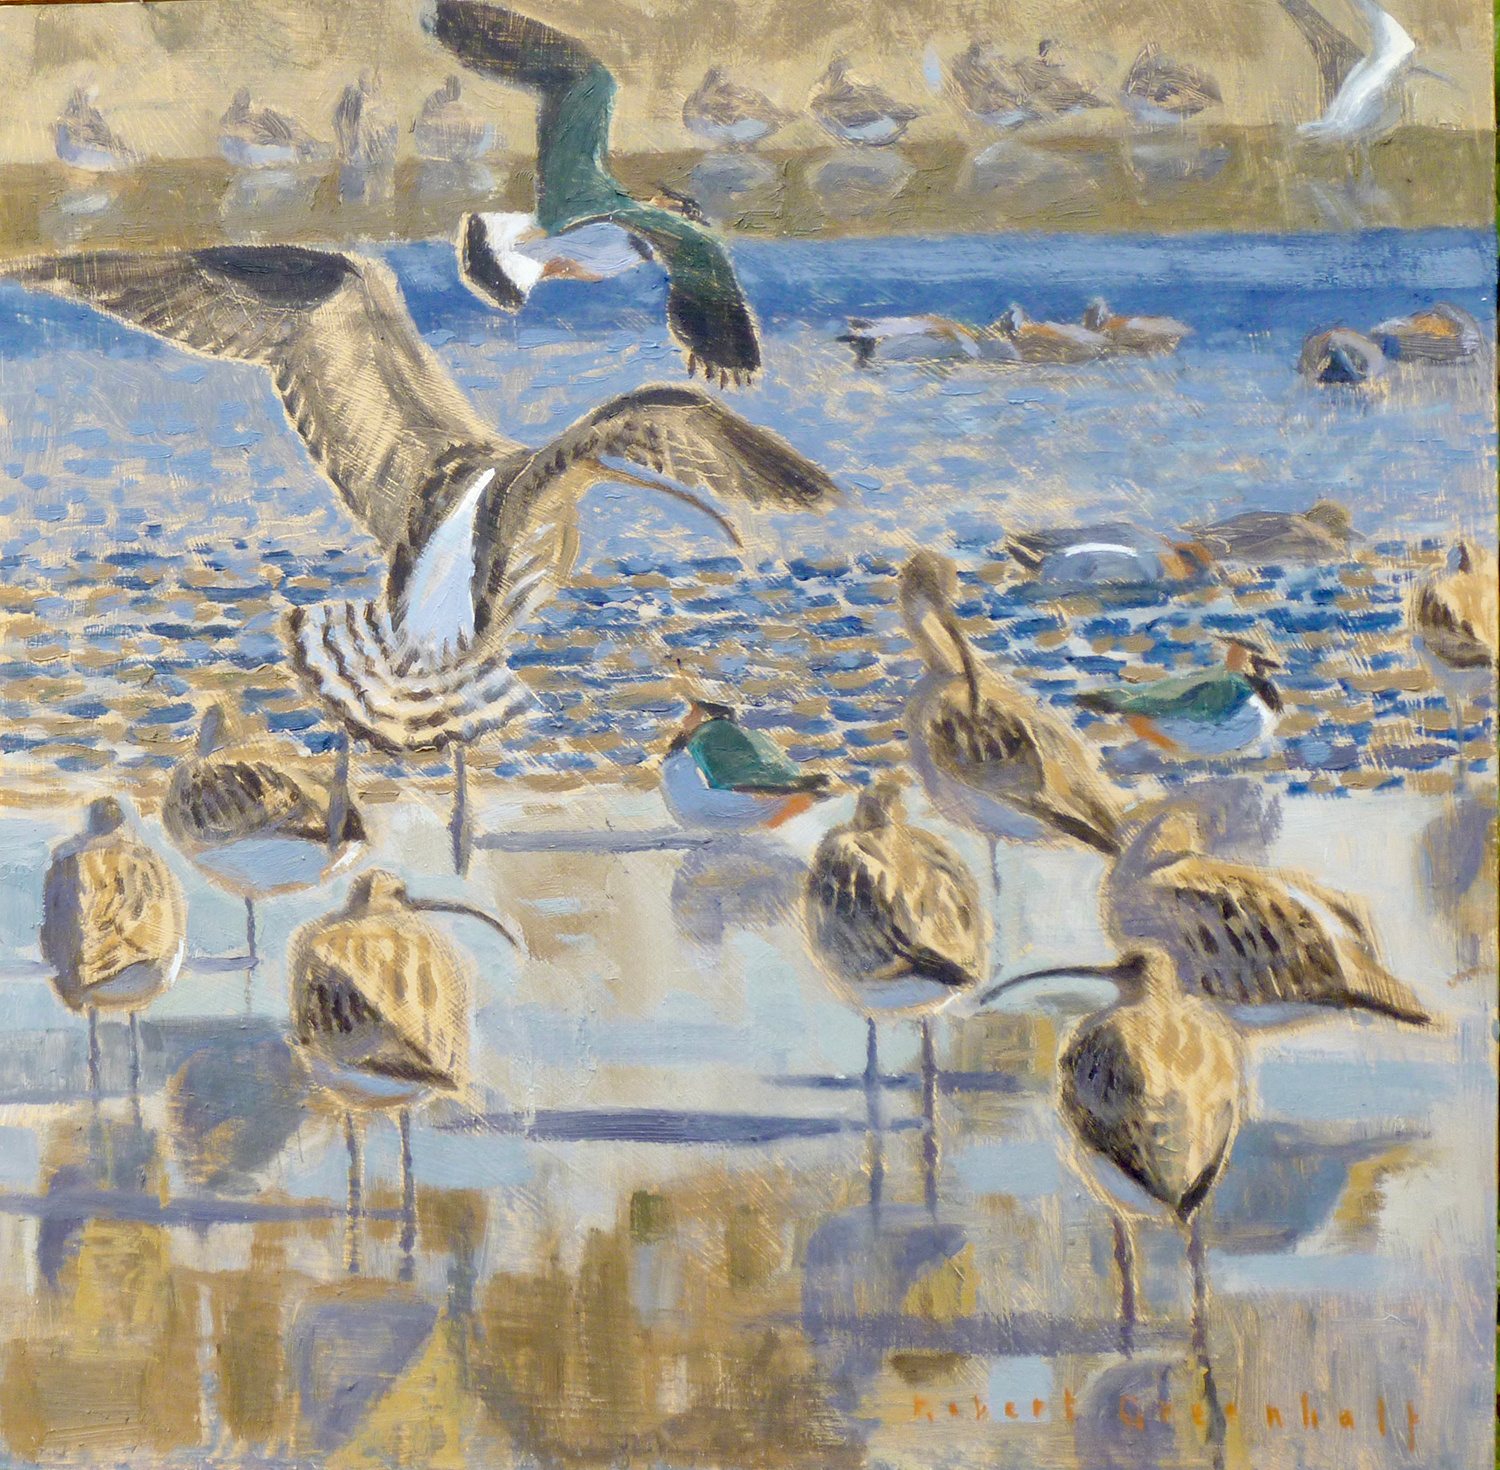 Curlews and Lapwings, Arnolds Marsh by Robert Greenhalf